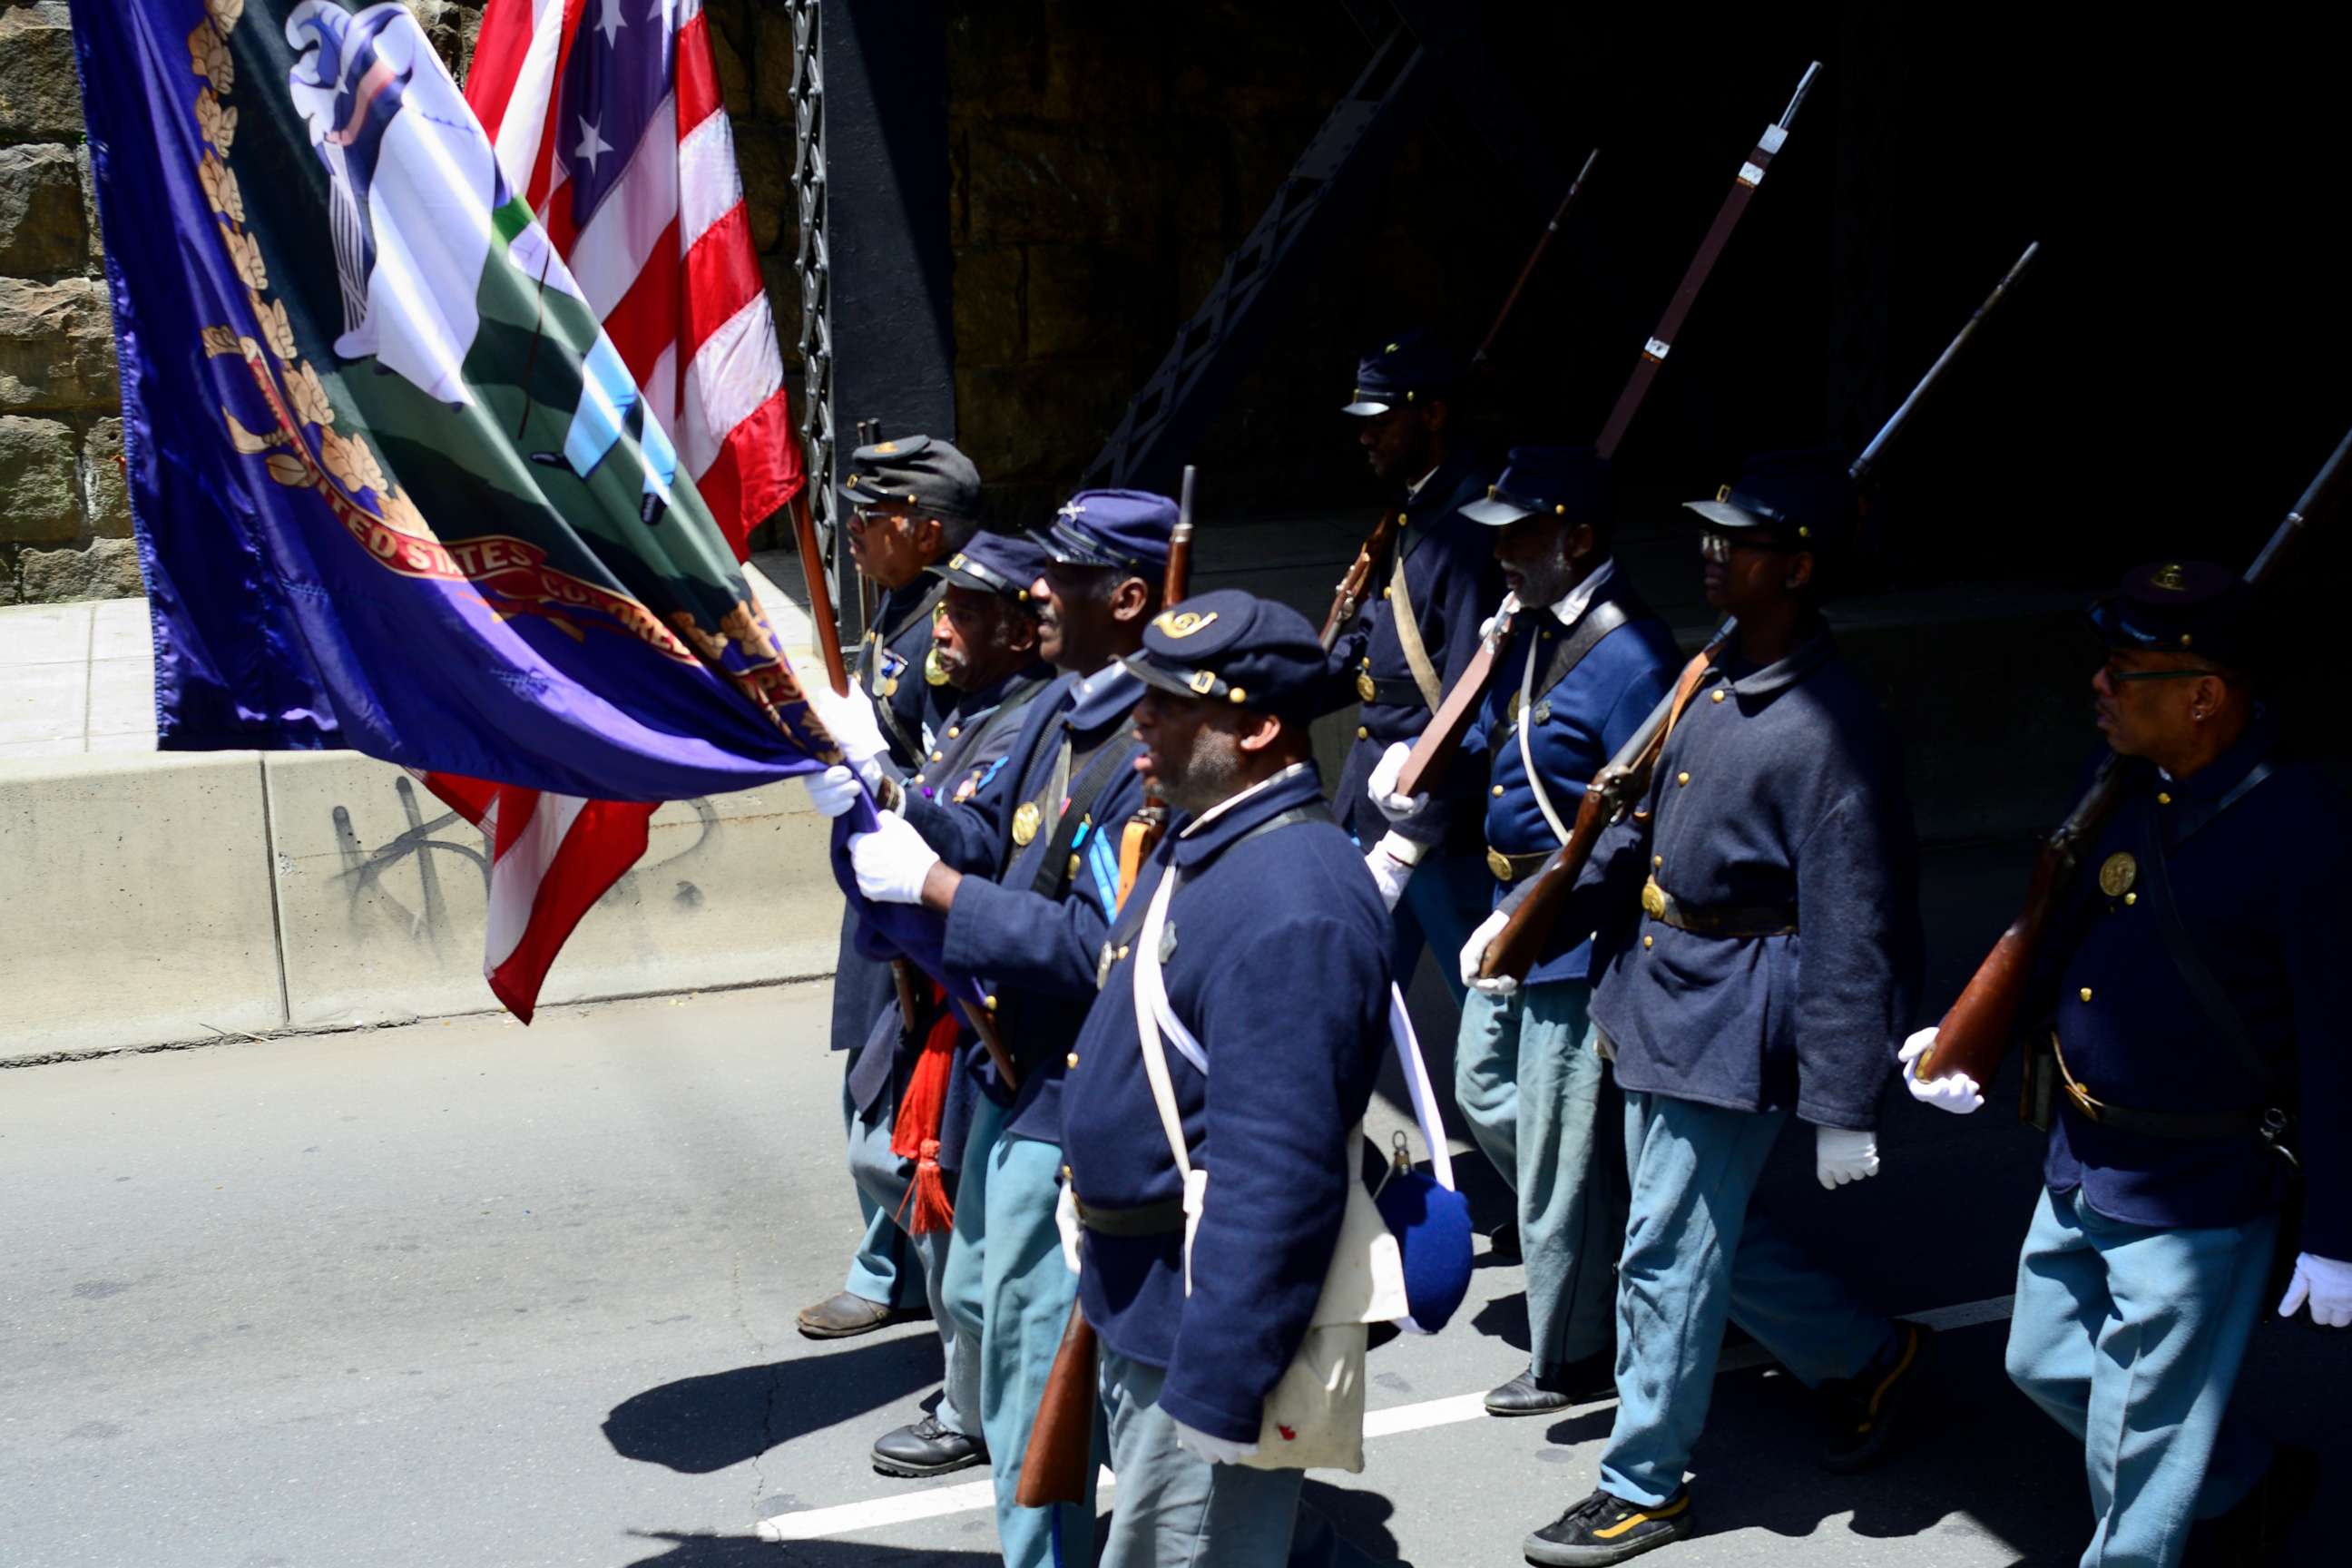 PHOTO: Elected officials, community leaders, youth and drum and marching bands take part in the second annual Juneteenth Parade, in Philadelphia on June 22, 2019.